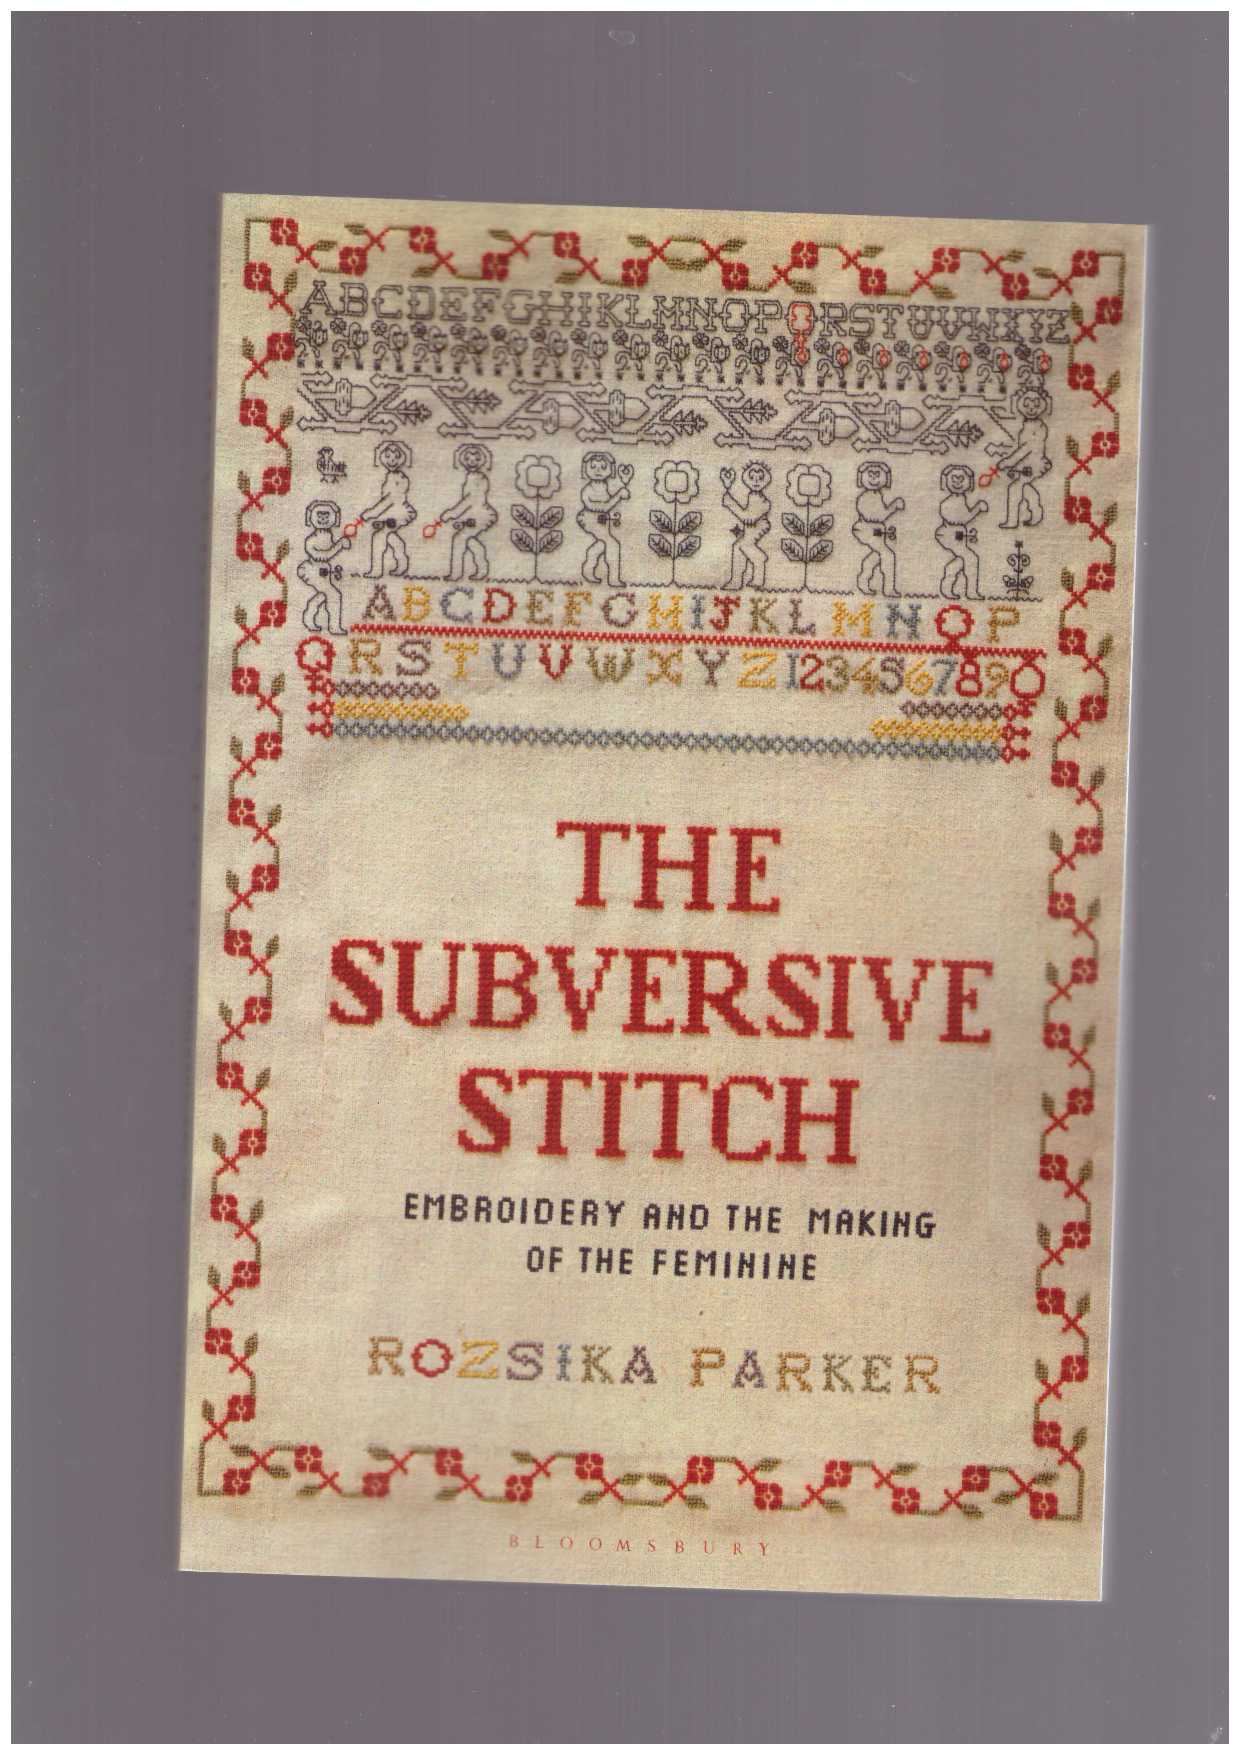 PARKER, Rozsika - The Subversive Stitch. Embroidery and the Making of the Feminine